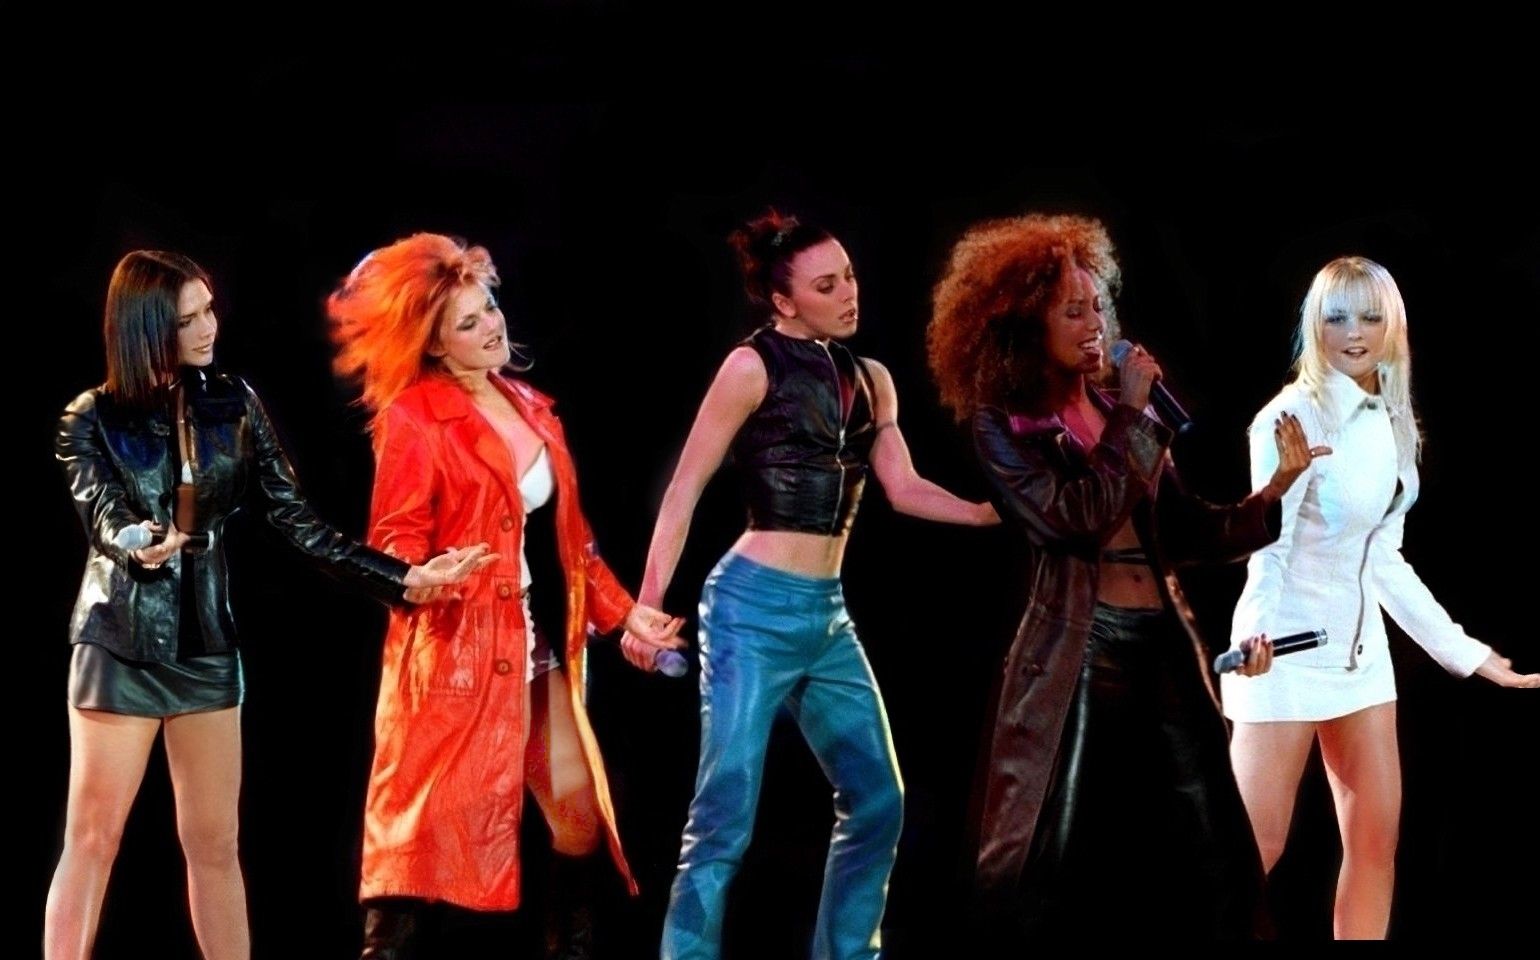 <p>The Spice Girls called it quits and stopped making music and touring in 2000 to focus on solo careers.</p>